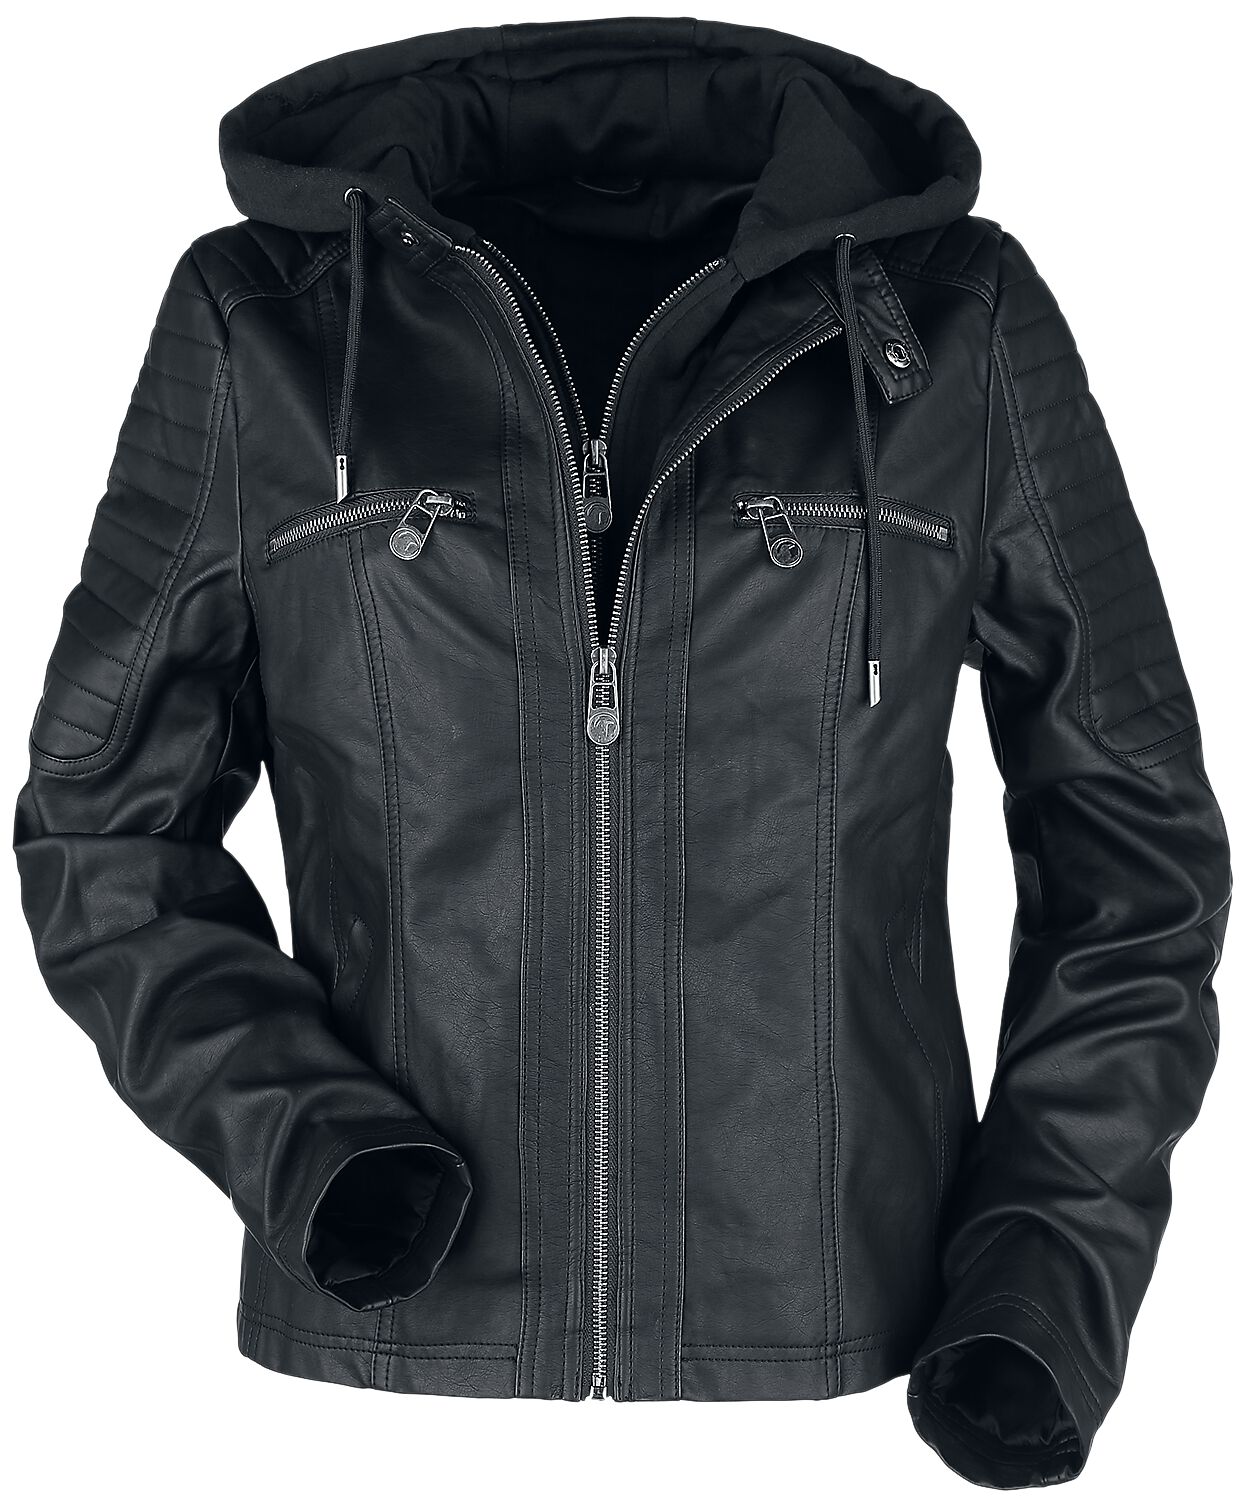 Tall Women Leather Jacket Black - Removable Hood